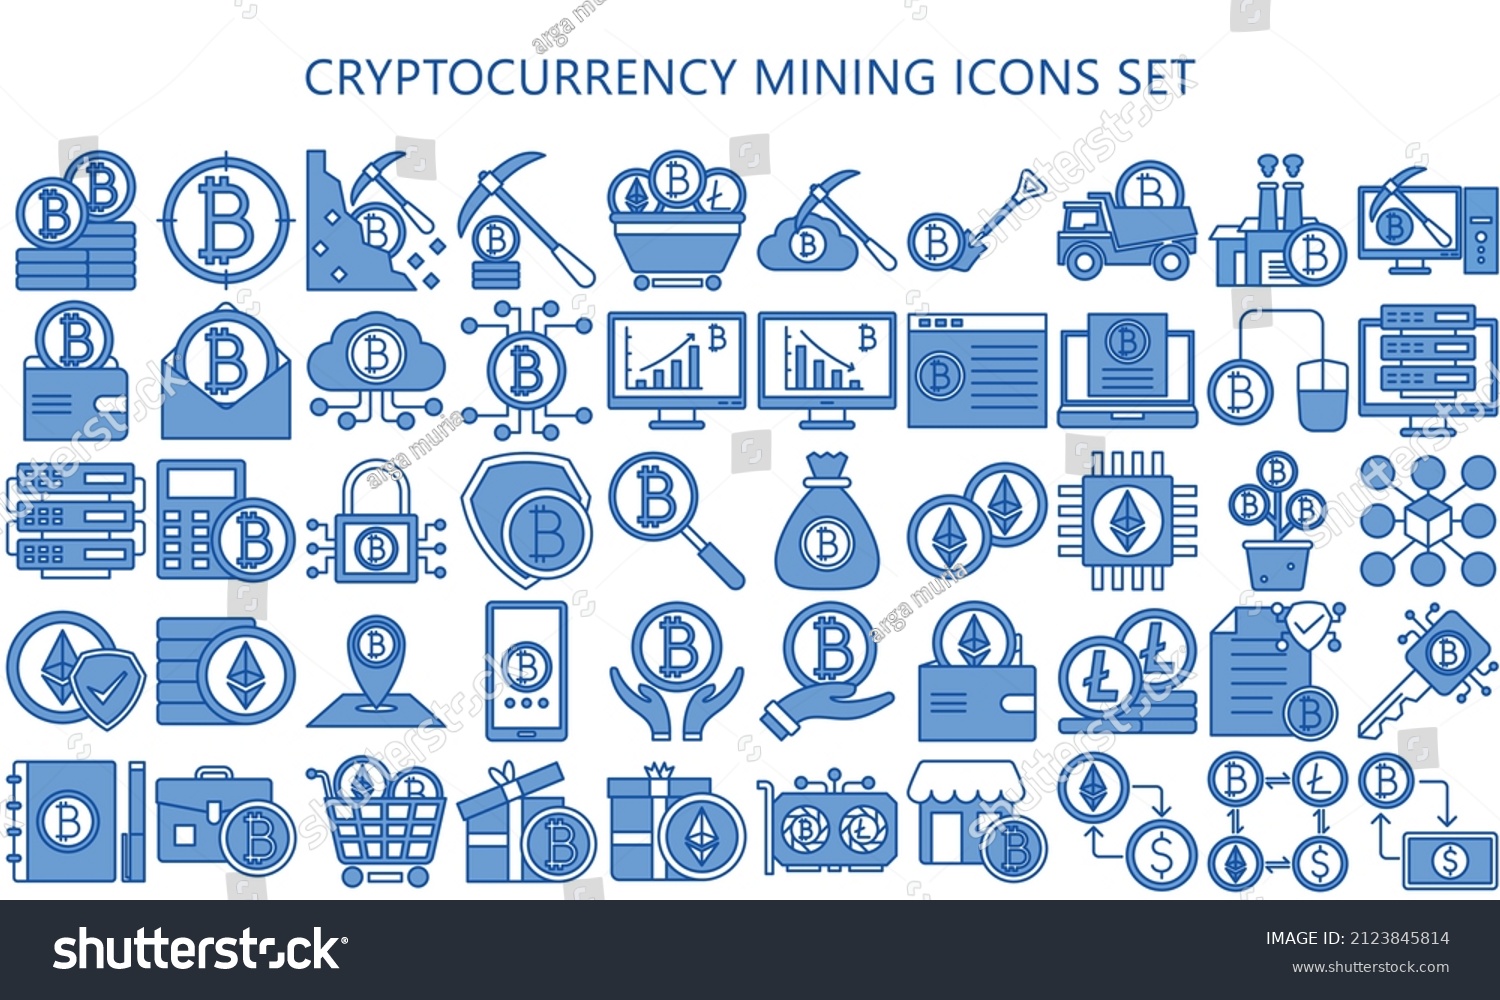 SVG of Cryptocurrency mining blue color icon set. bitcoin, ethereum, fintech pictograms for web and mobile app GUI. Blockchain technology simple UI, UX and applications, vector EPS 10 ready convert to SVG. svg